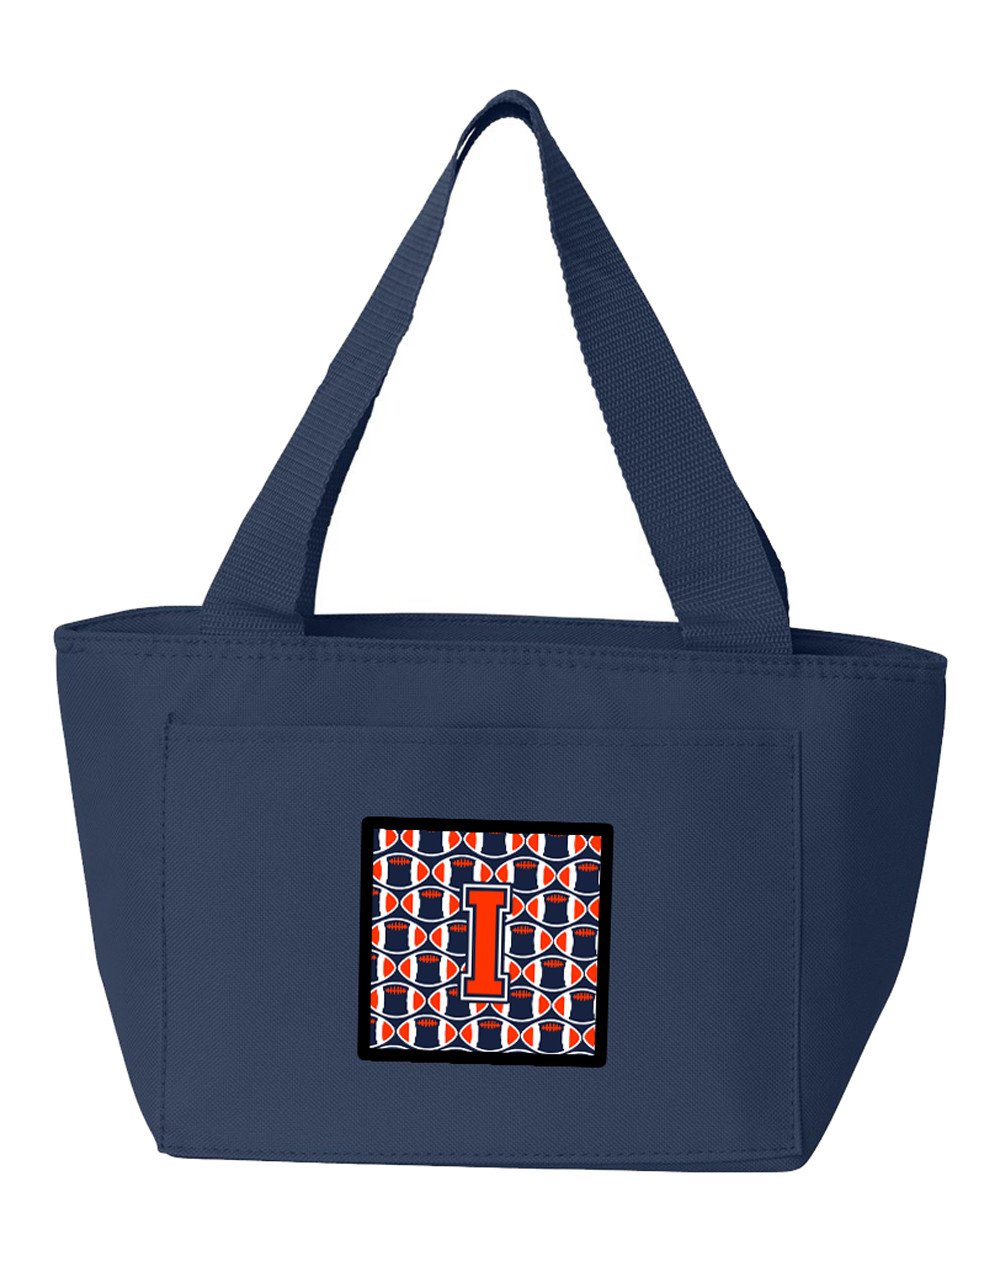 Letter I Football Orange, Blue and white Lunch Bag CJ1066-INA-8808 by Caroline's Treasures